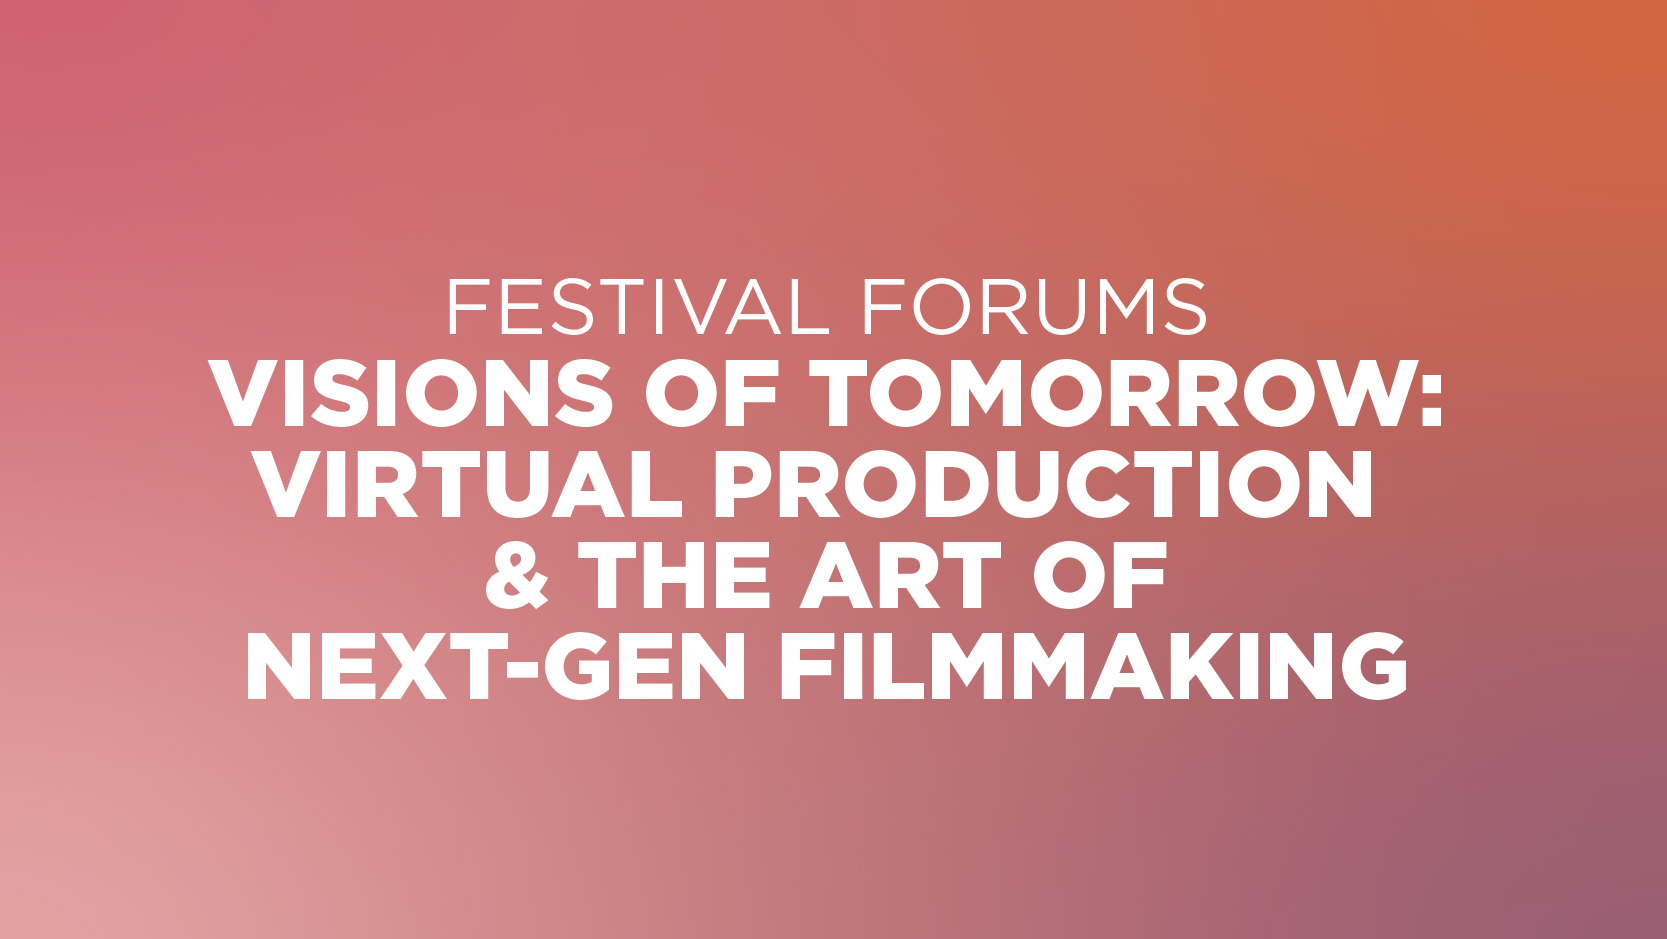 Visions of Tomorrow: Virtual Production & the Art of Next-Gen Filmmaking